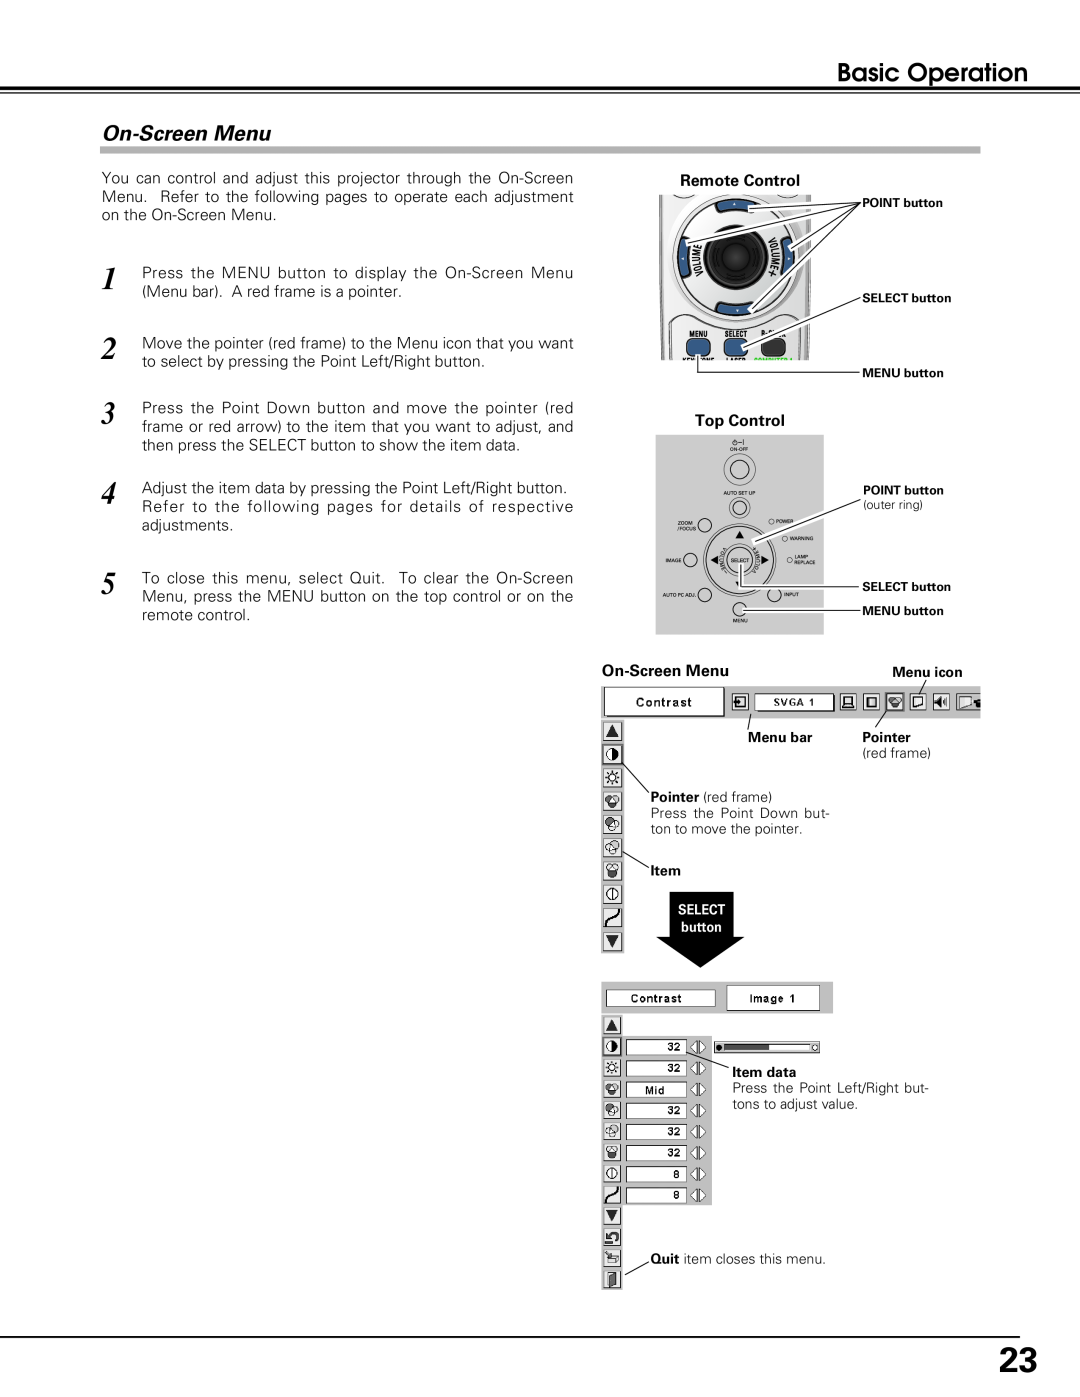 Eiki LC-XE10 instruction manual On-Screen Menu, Basic Operation, Remote Control, Top Control 